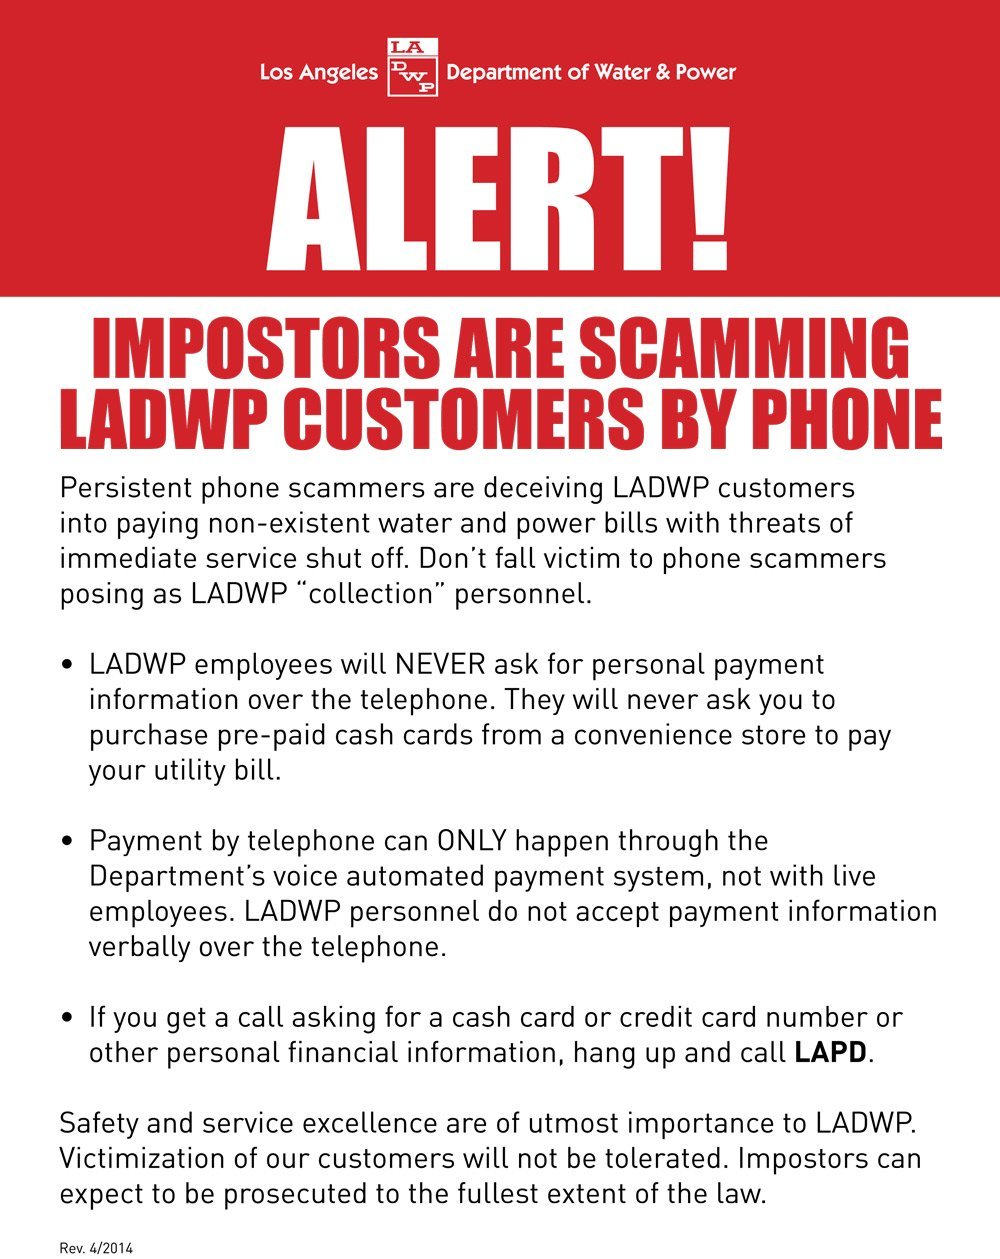 Alert! Imposters Are Scamming LADWP Customers By Phone - Canoga Park Neighborhood Council